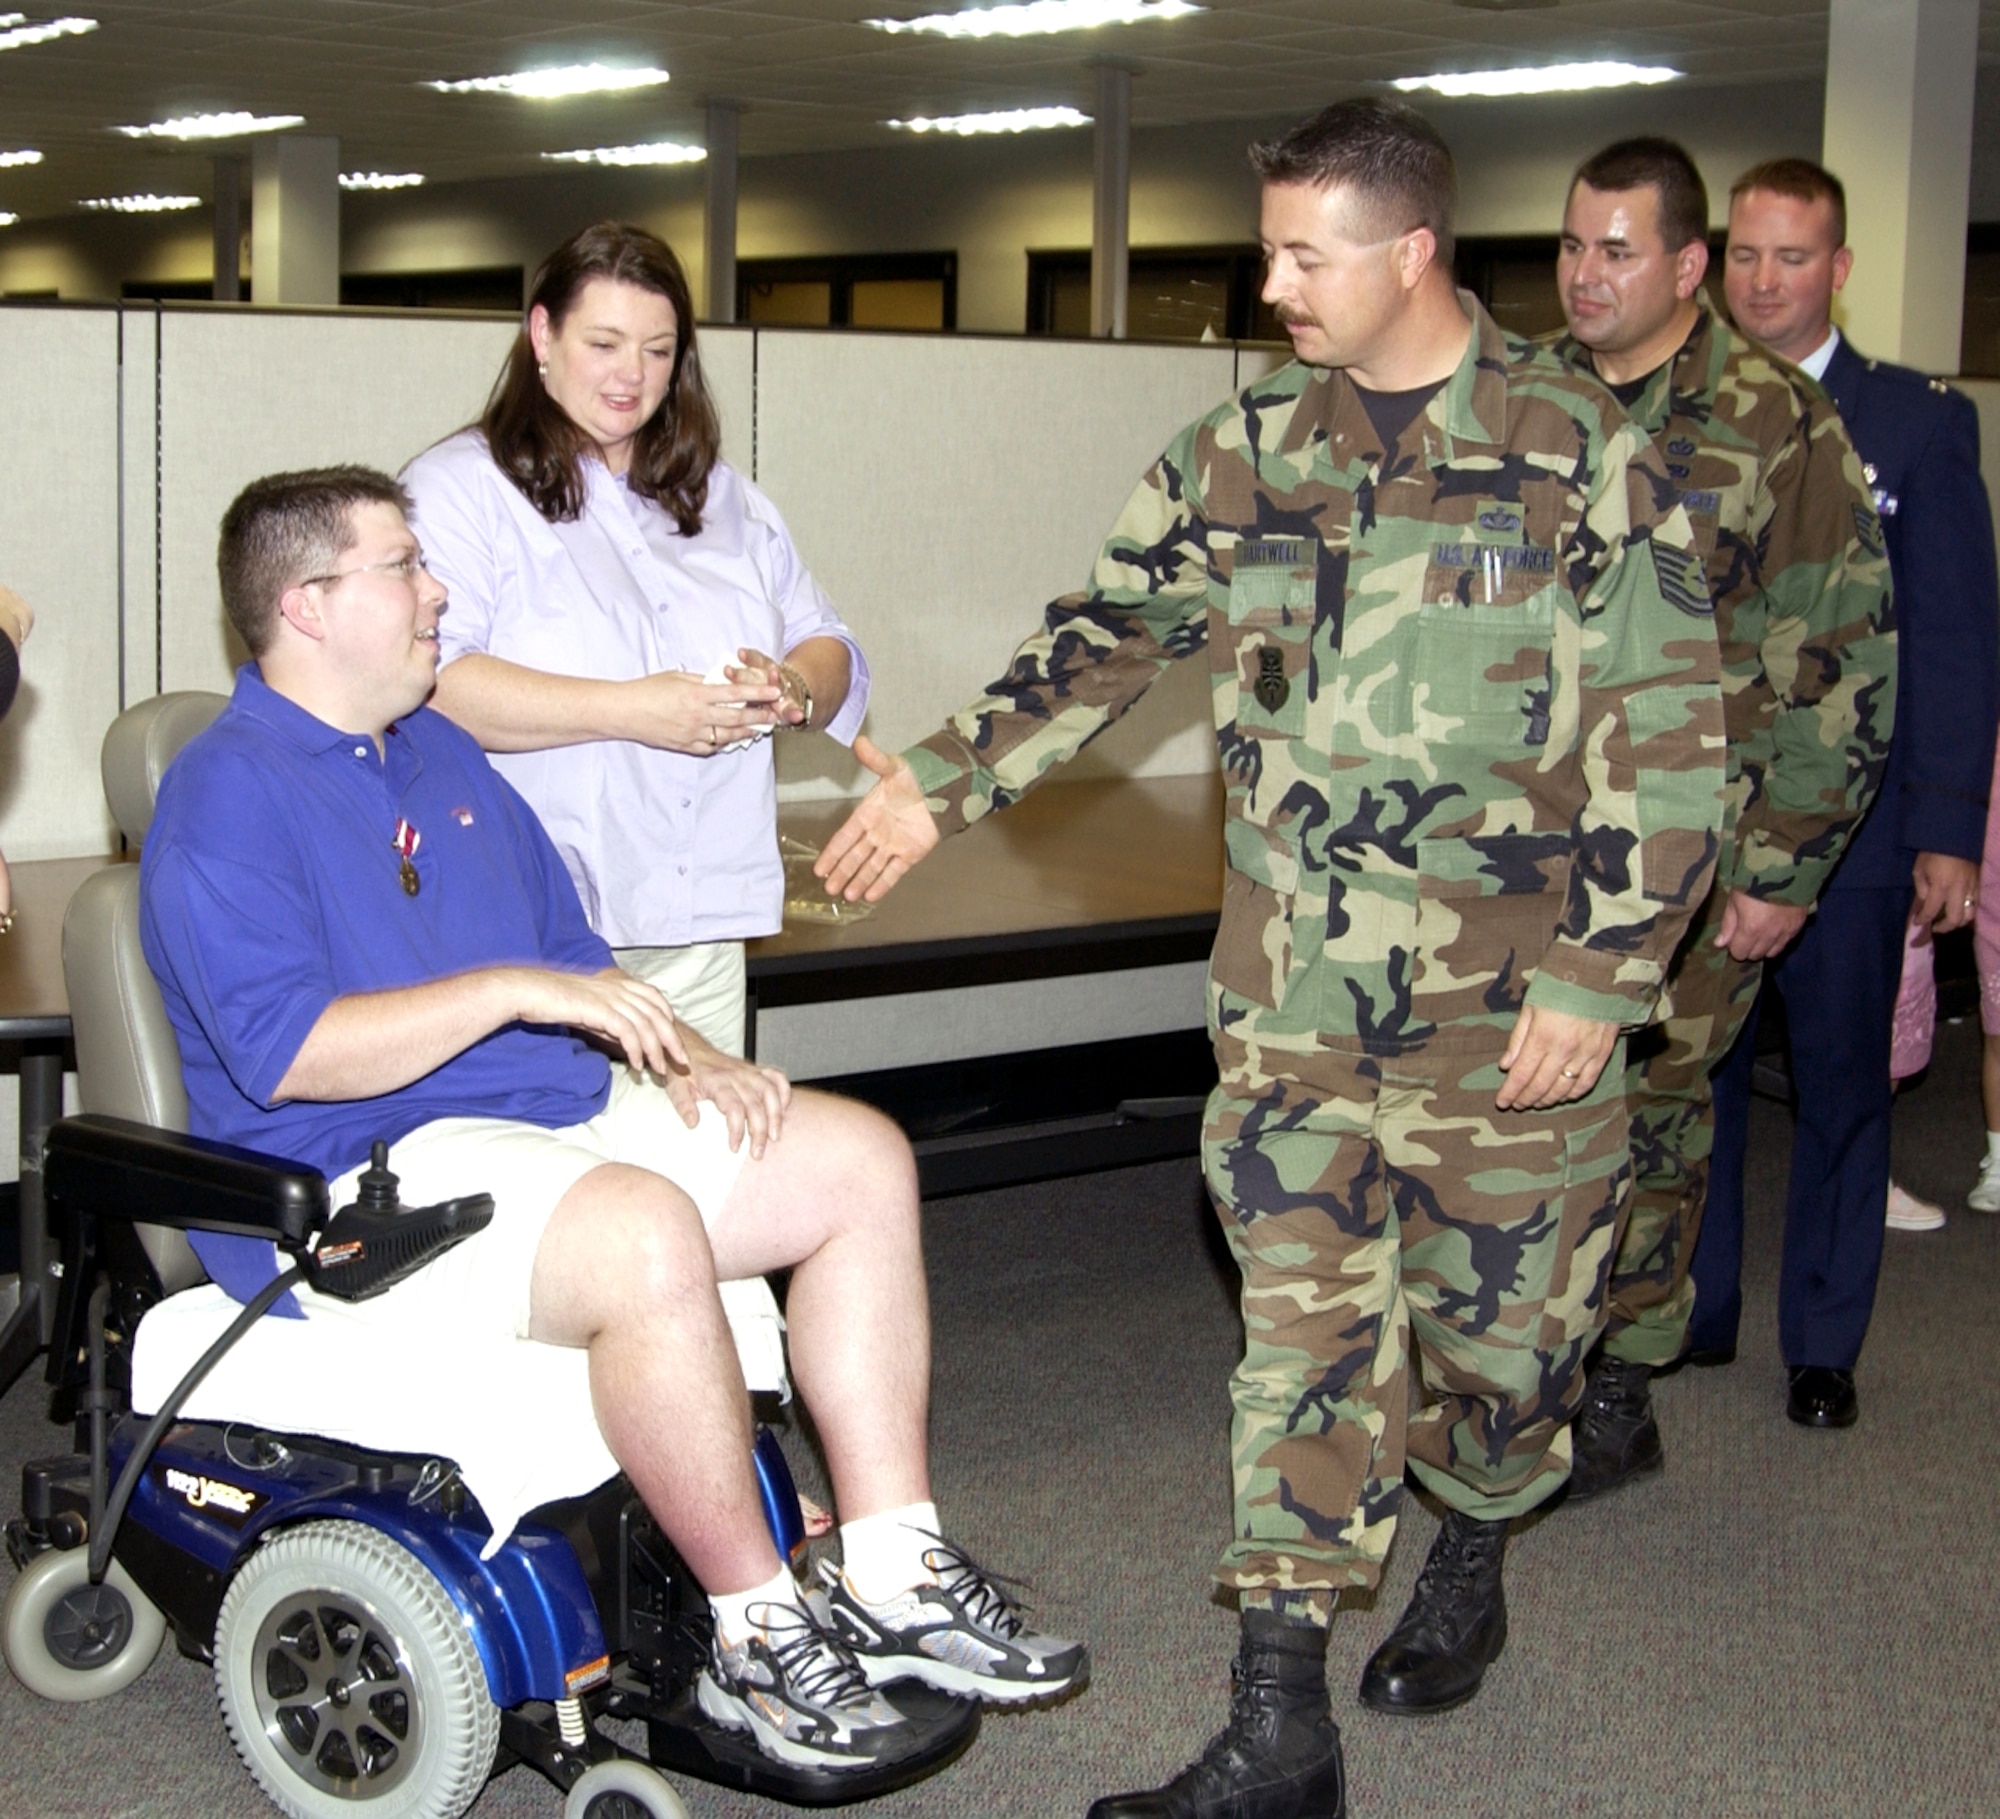 Lou Gehrig's disease forces Airman to retire > Air Force > Article Display